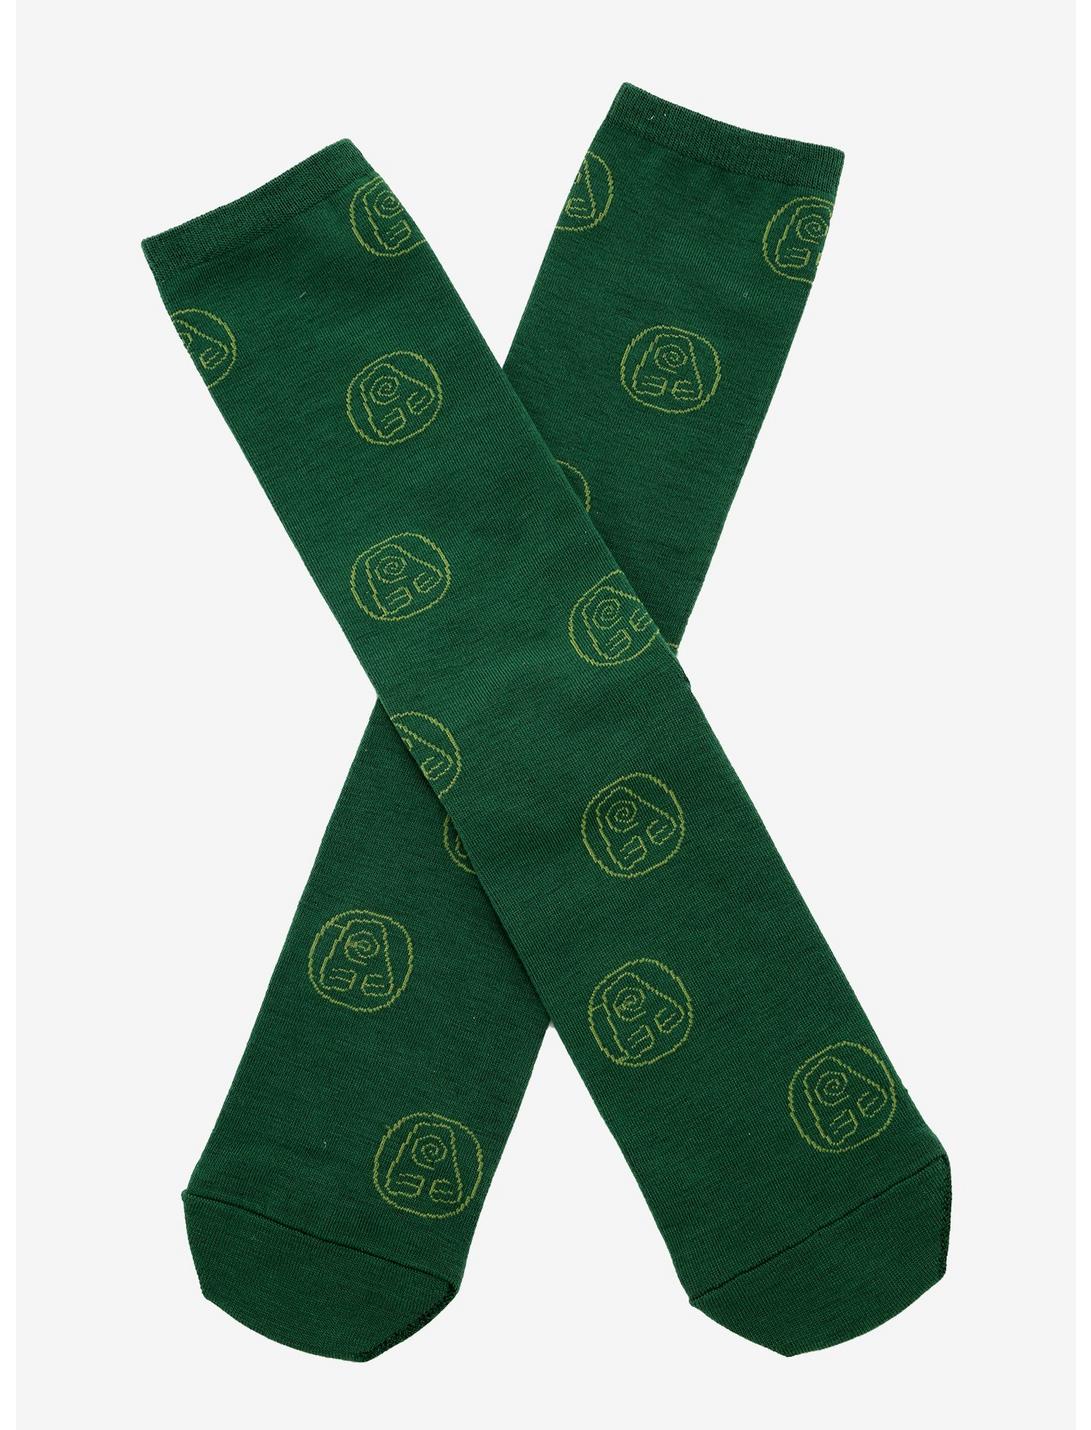 Avatar: The Last Airbender Earthbending Symbol Crew Socks - BoxLunch Exclusive, , hi-res